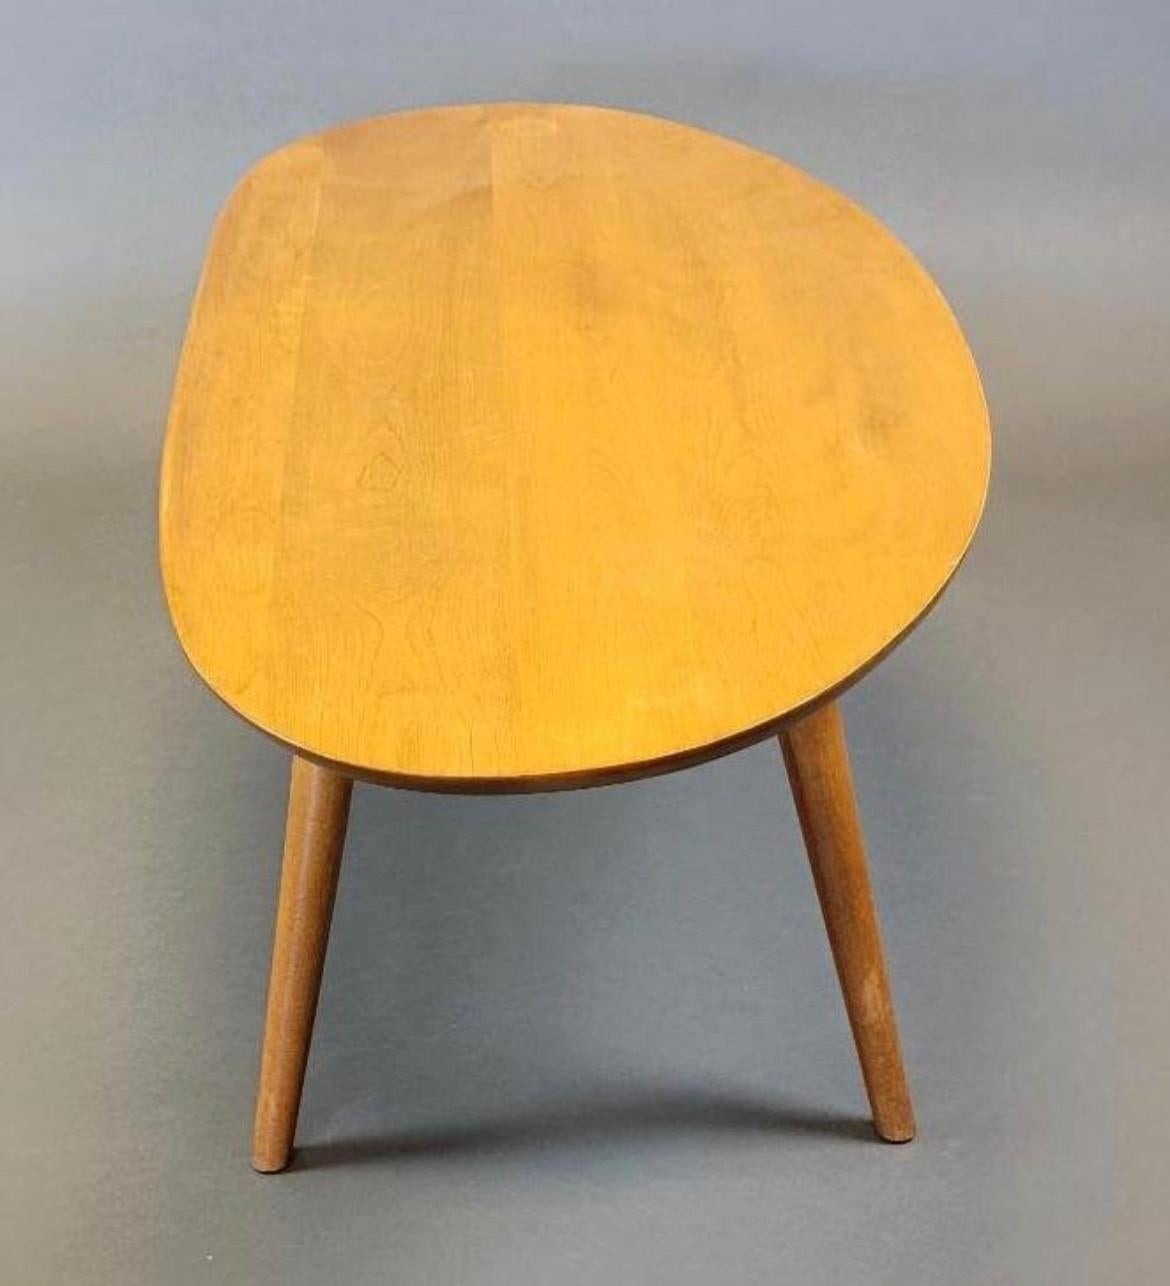 A wonderful and playful oval shaped coffee table with a raised edge. Made from solid maple. Designed by the famous architect Russel Wright. In original condition showing normal wear for use. Blonde maple finish. Located in Brooklyn NYC.